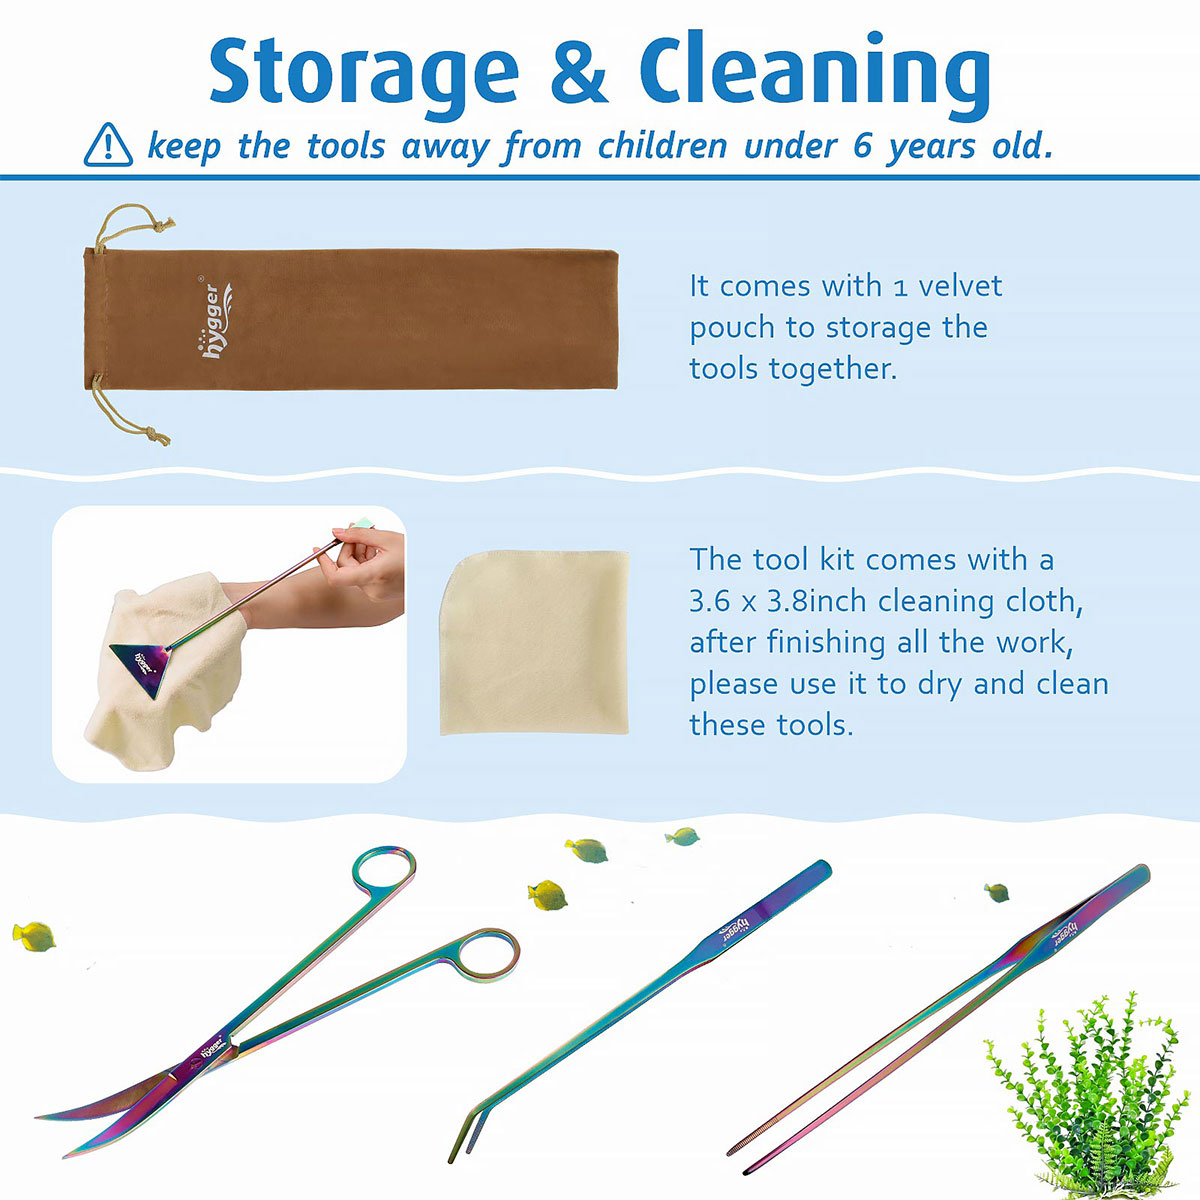  Hygger Multi-Use Fish Tank Cleaning Tools Kit, 6 In